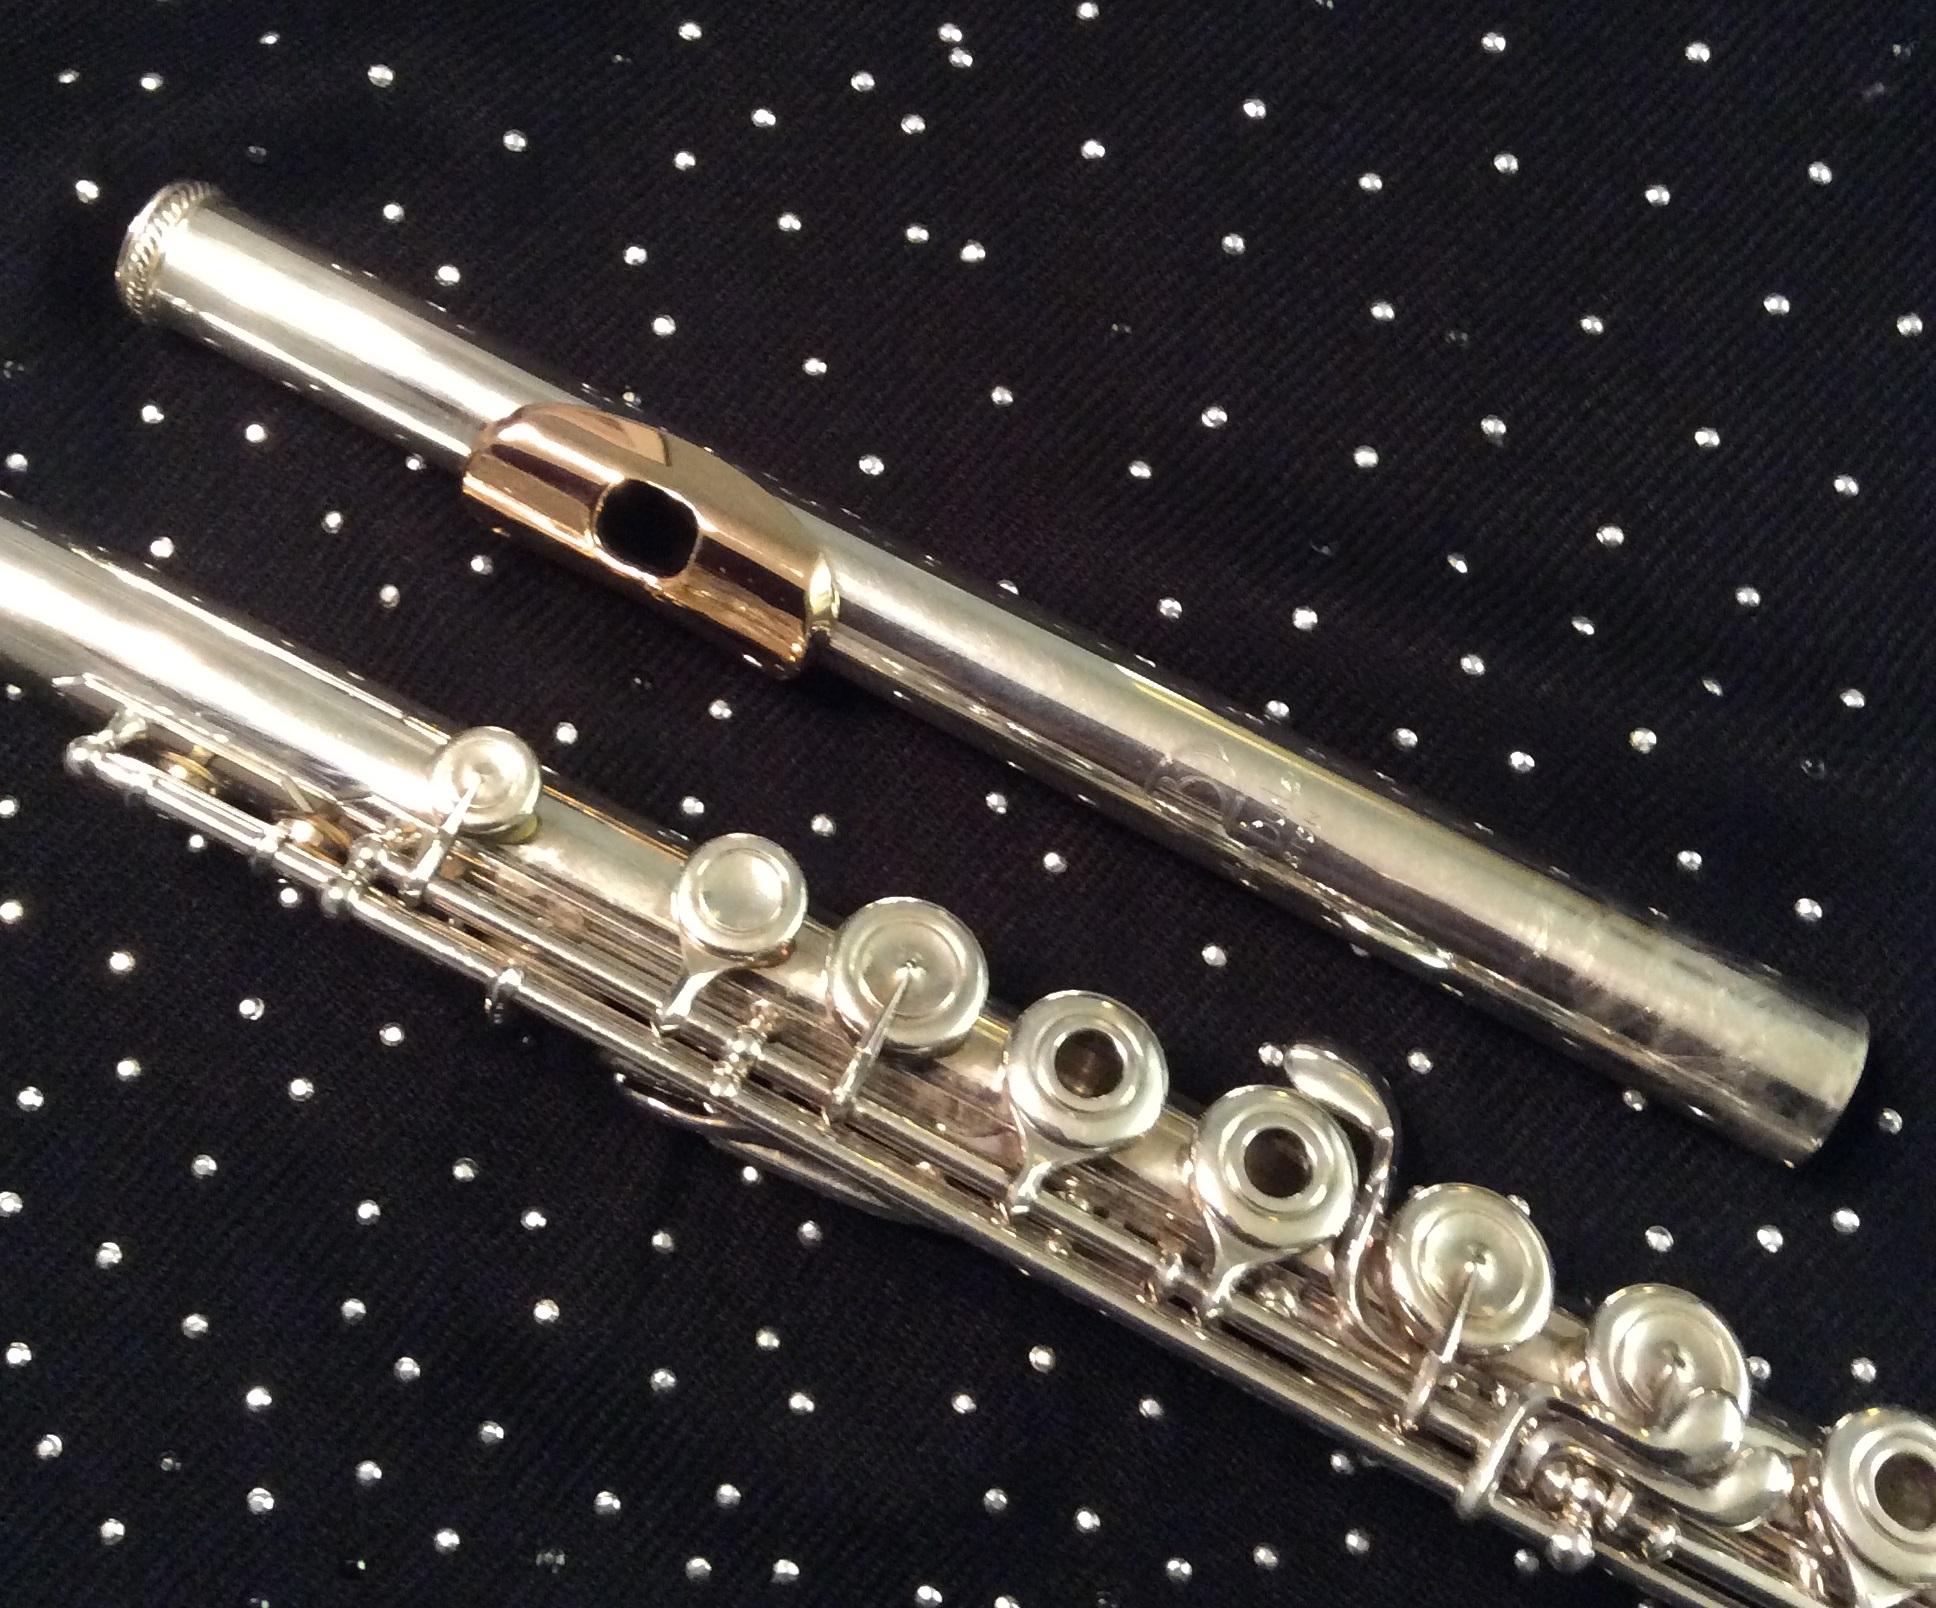 two flutes resting on a sparkly black background